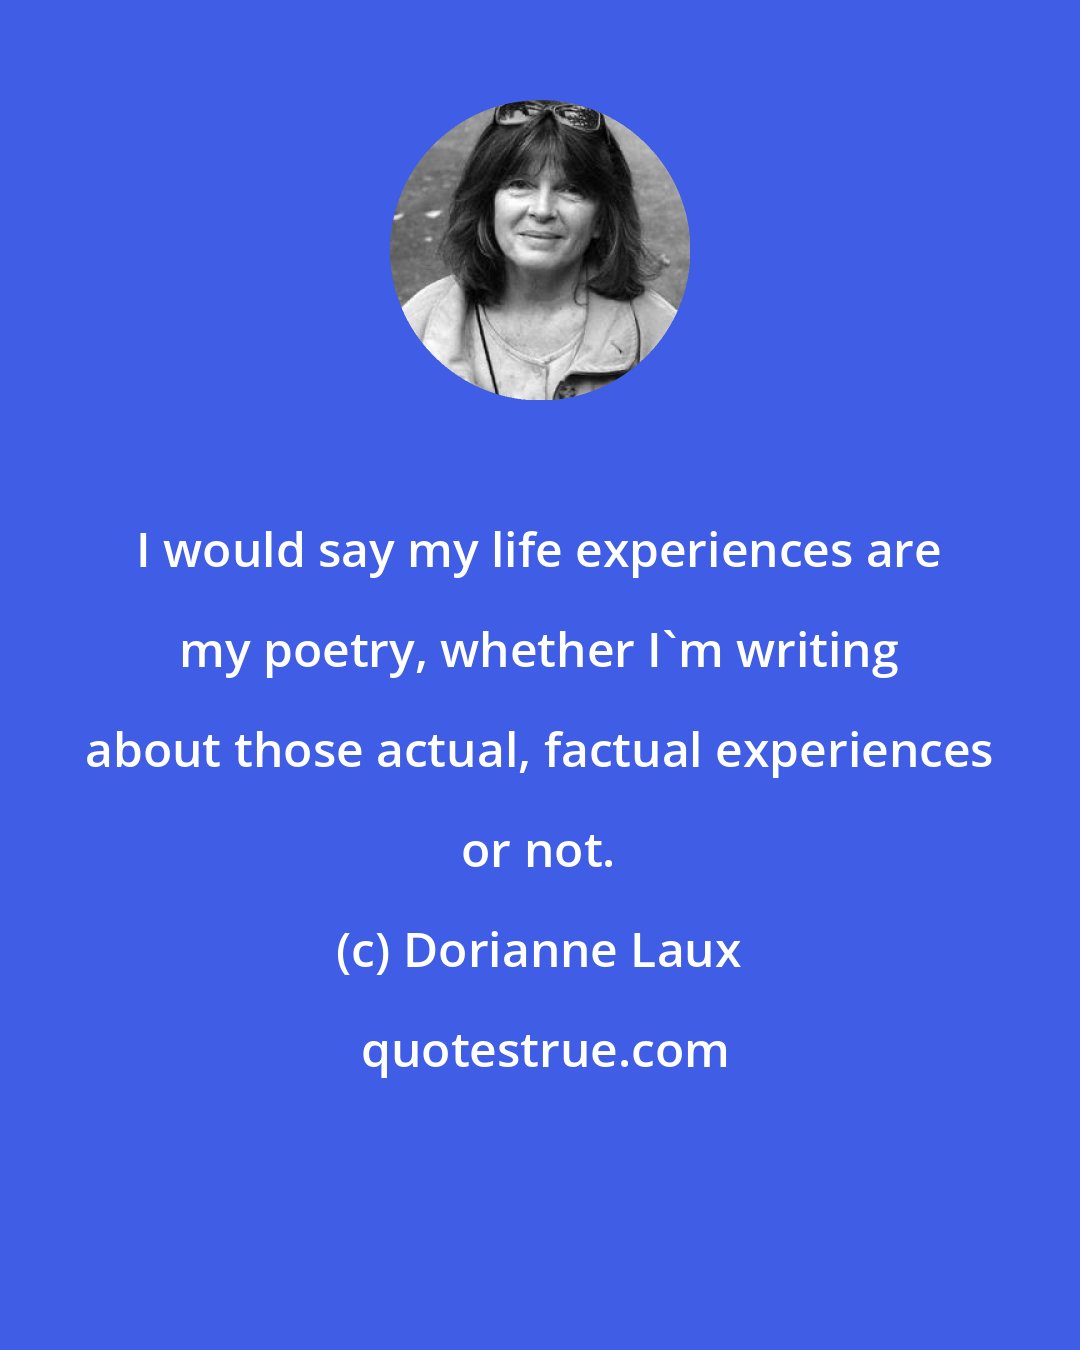 Dorianne Laux: I would say my life experiences are my poetry, whether I'm writing about those actual, factual experiences or not.